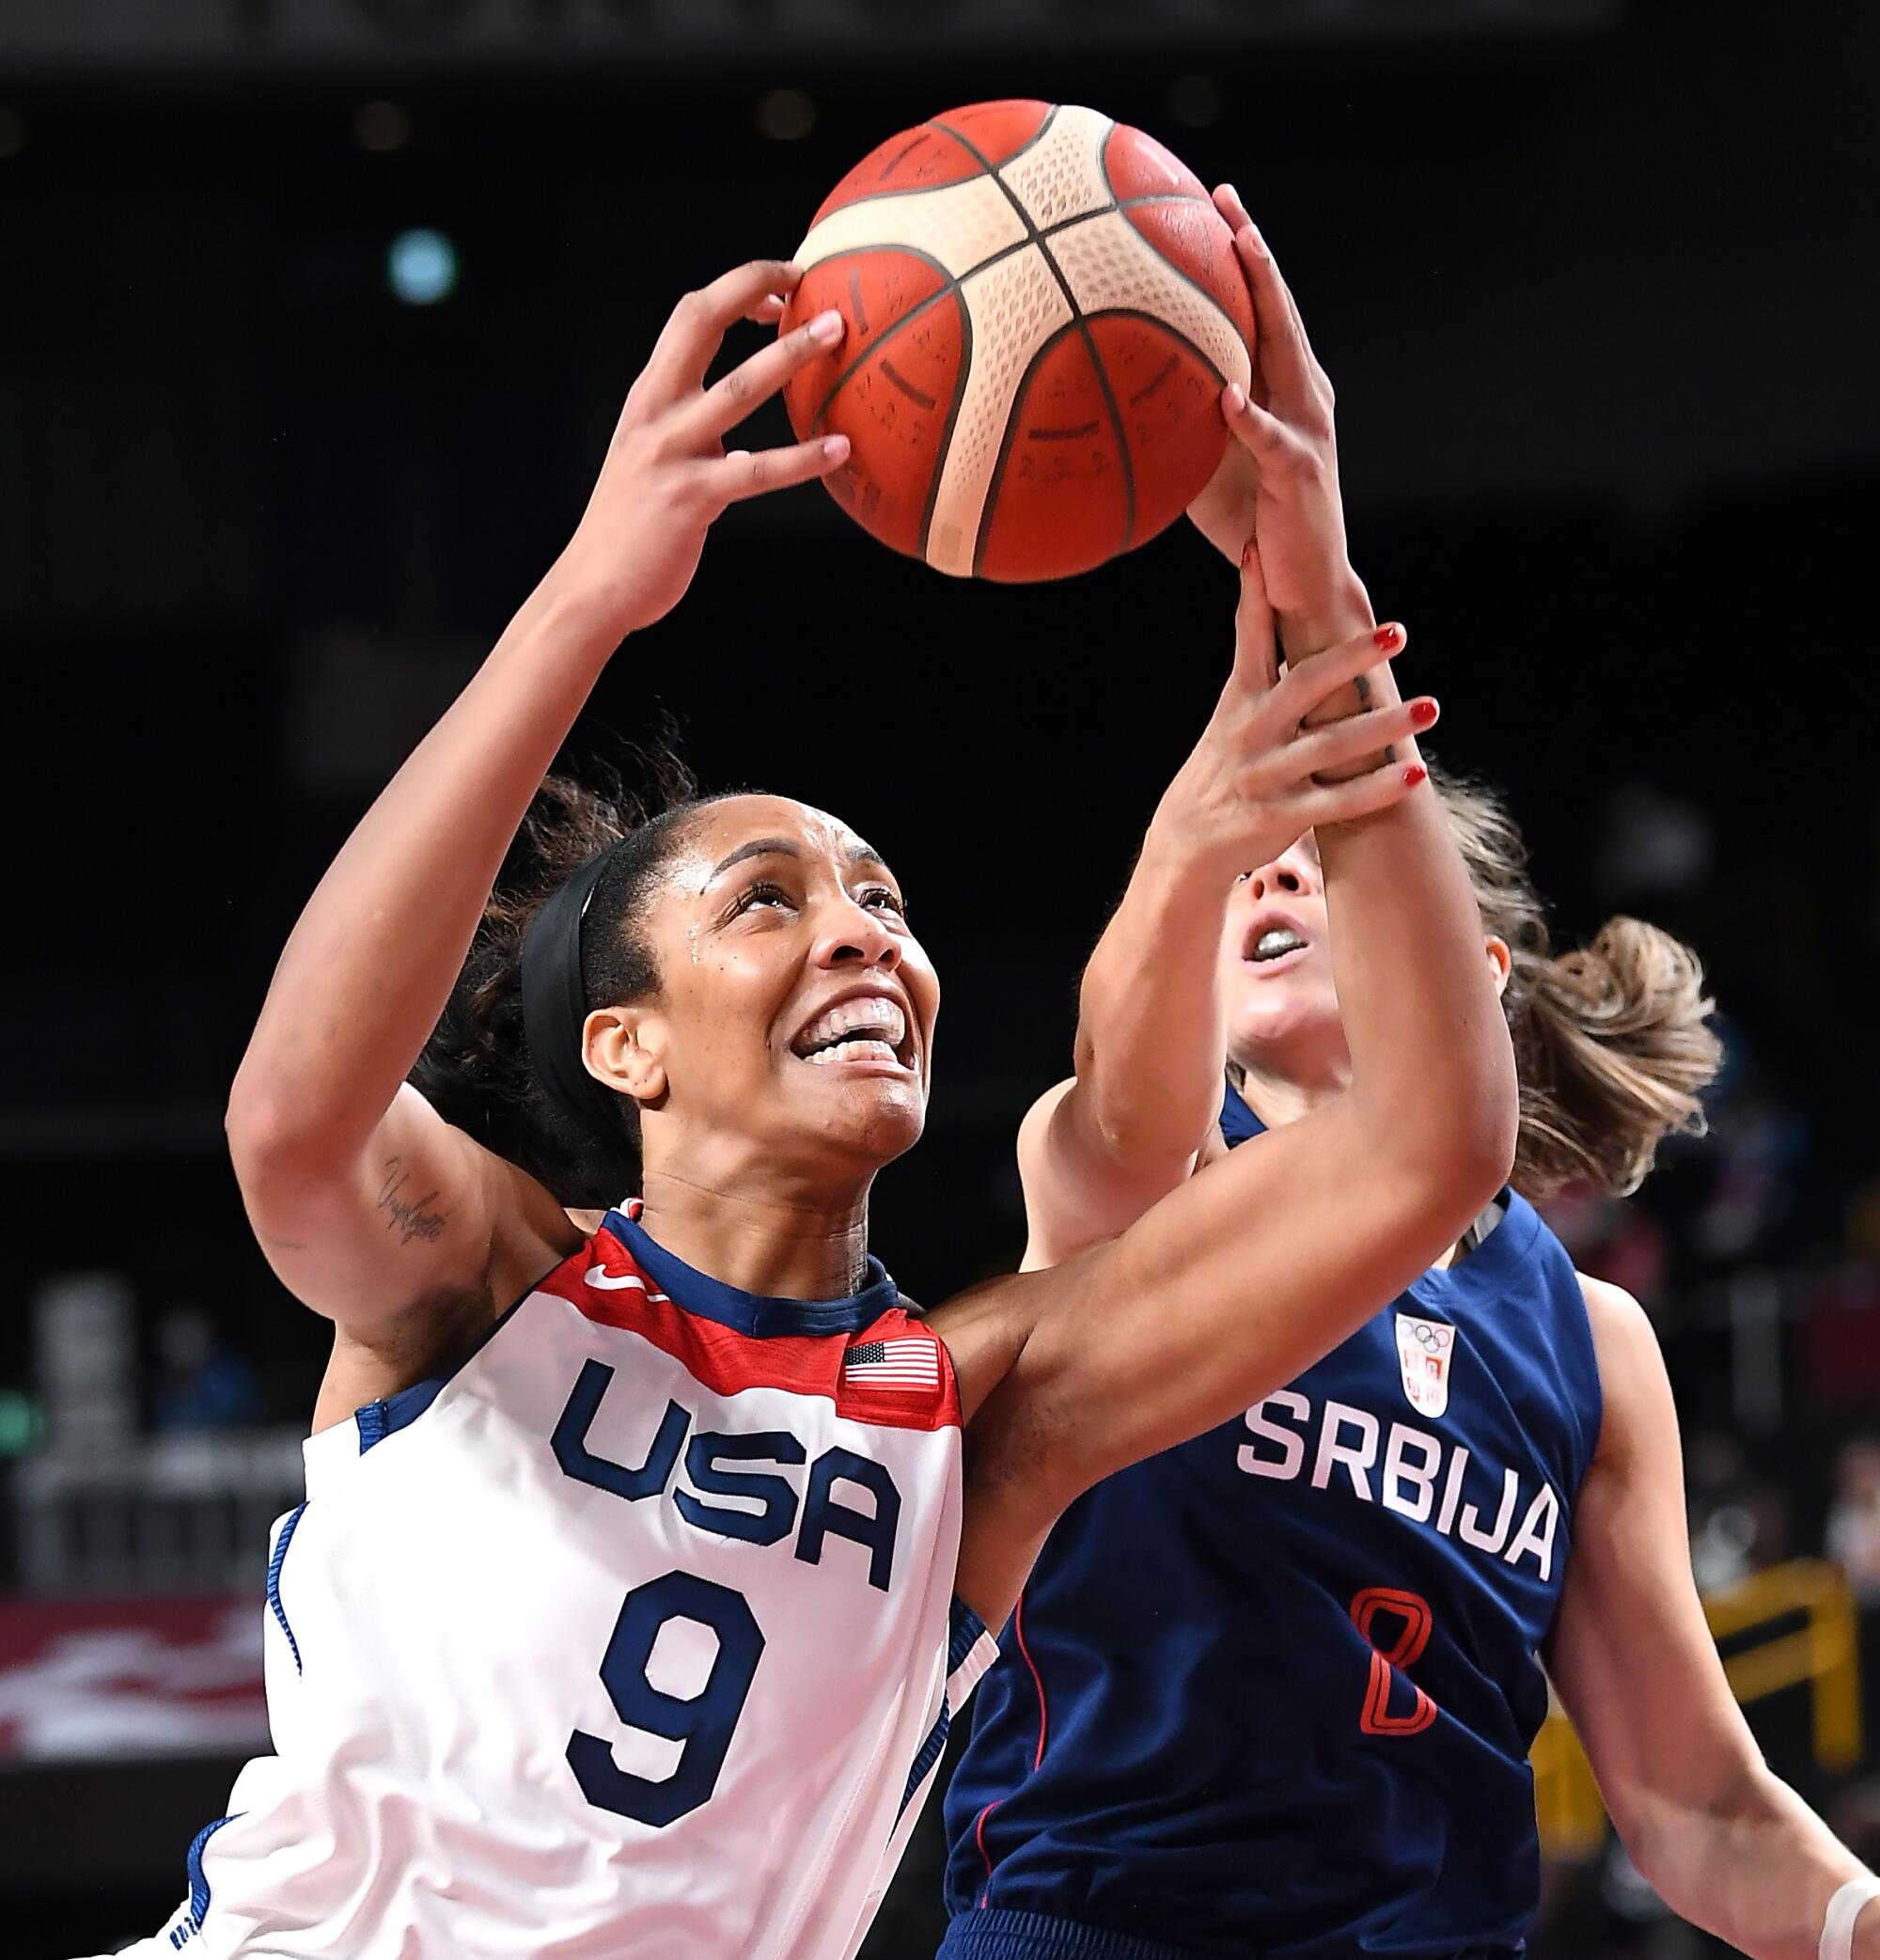 Serbia's Nevena Jovanovic fouls A'ja Wilson during a basketball game at the Tokyo Olympics.